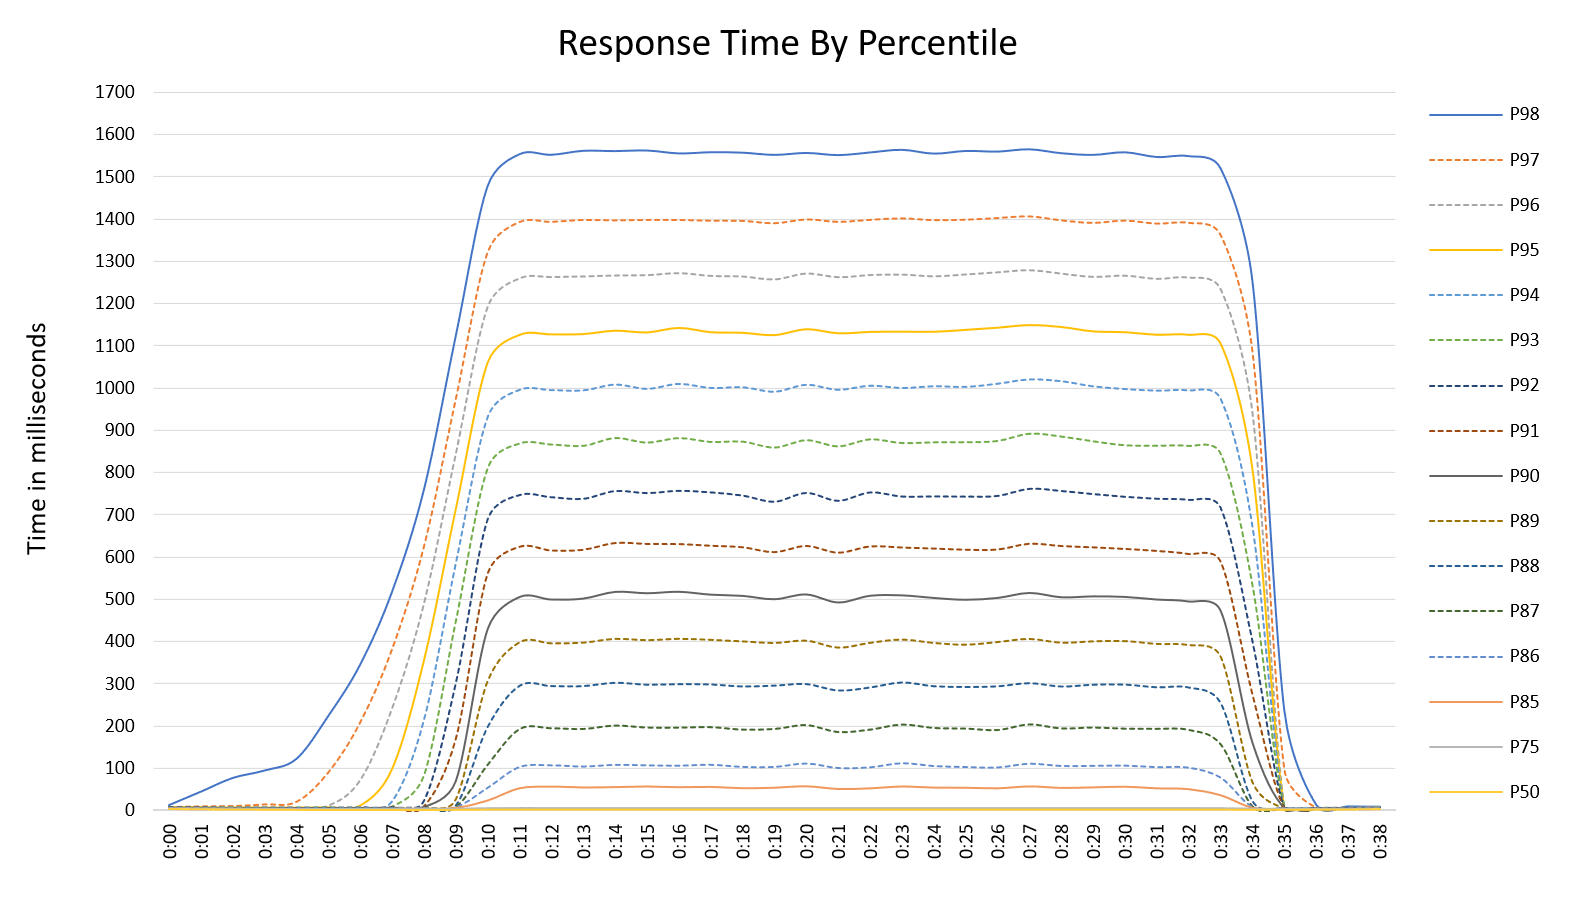 Performance by percentile